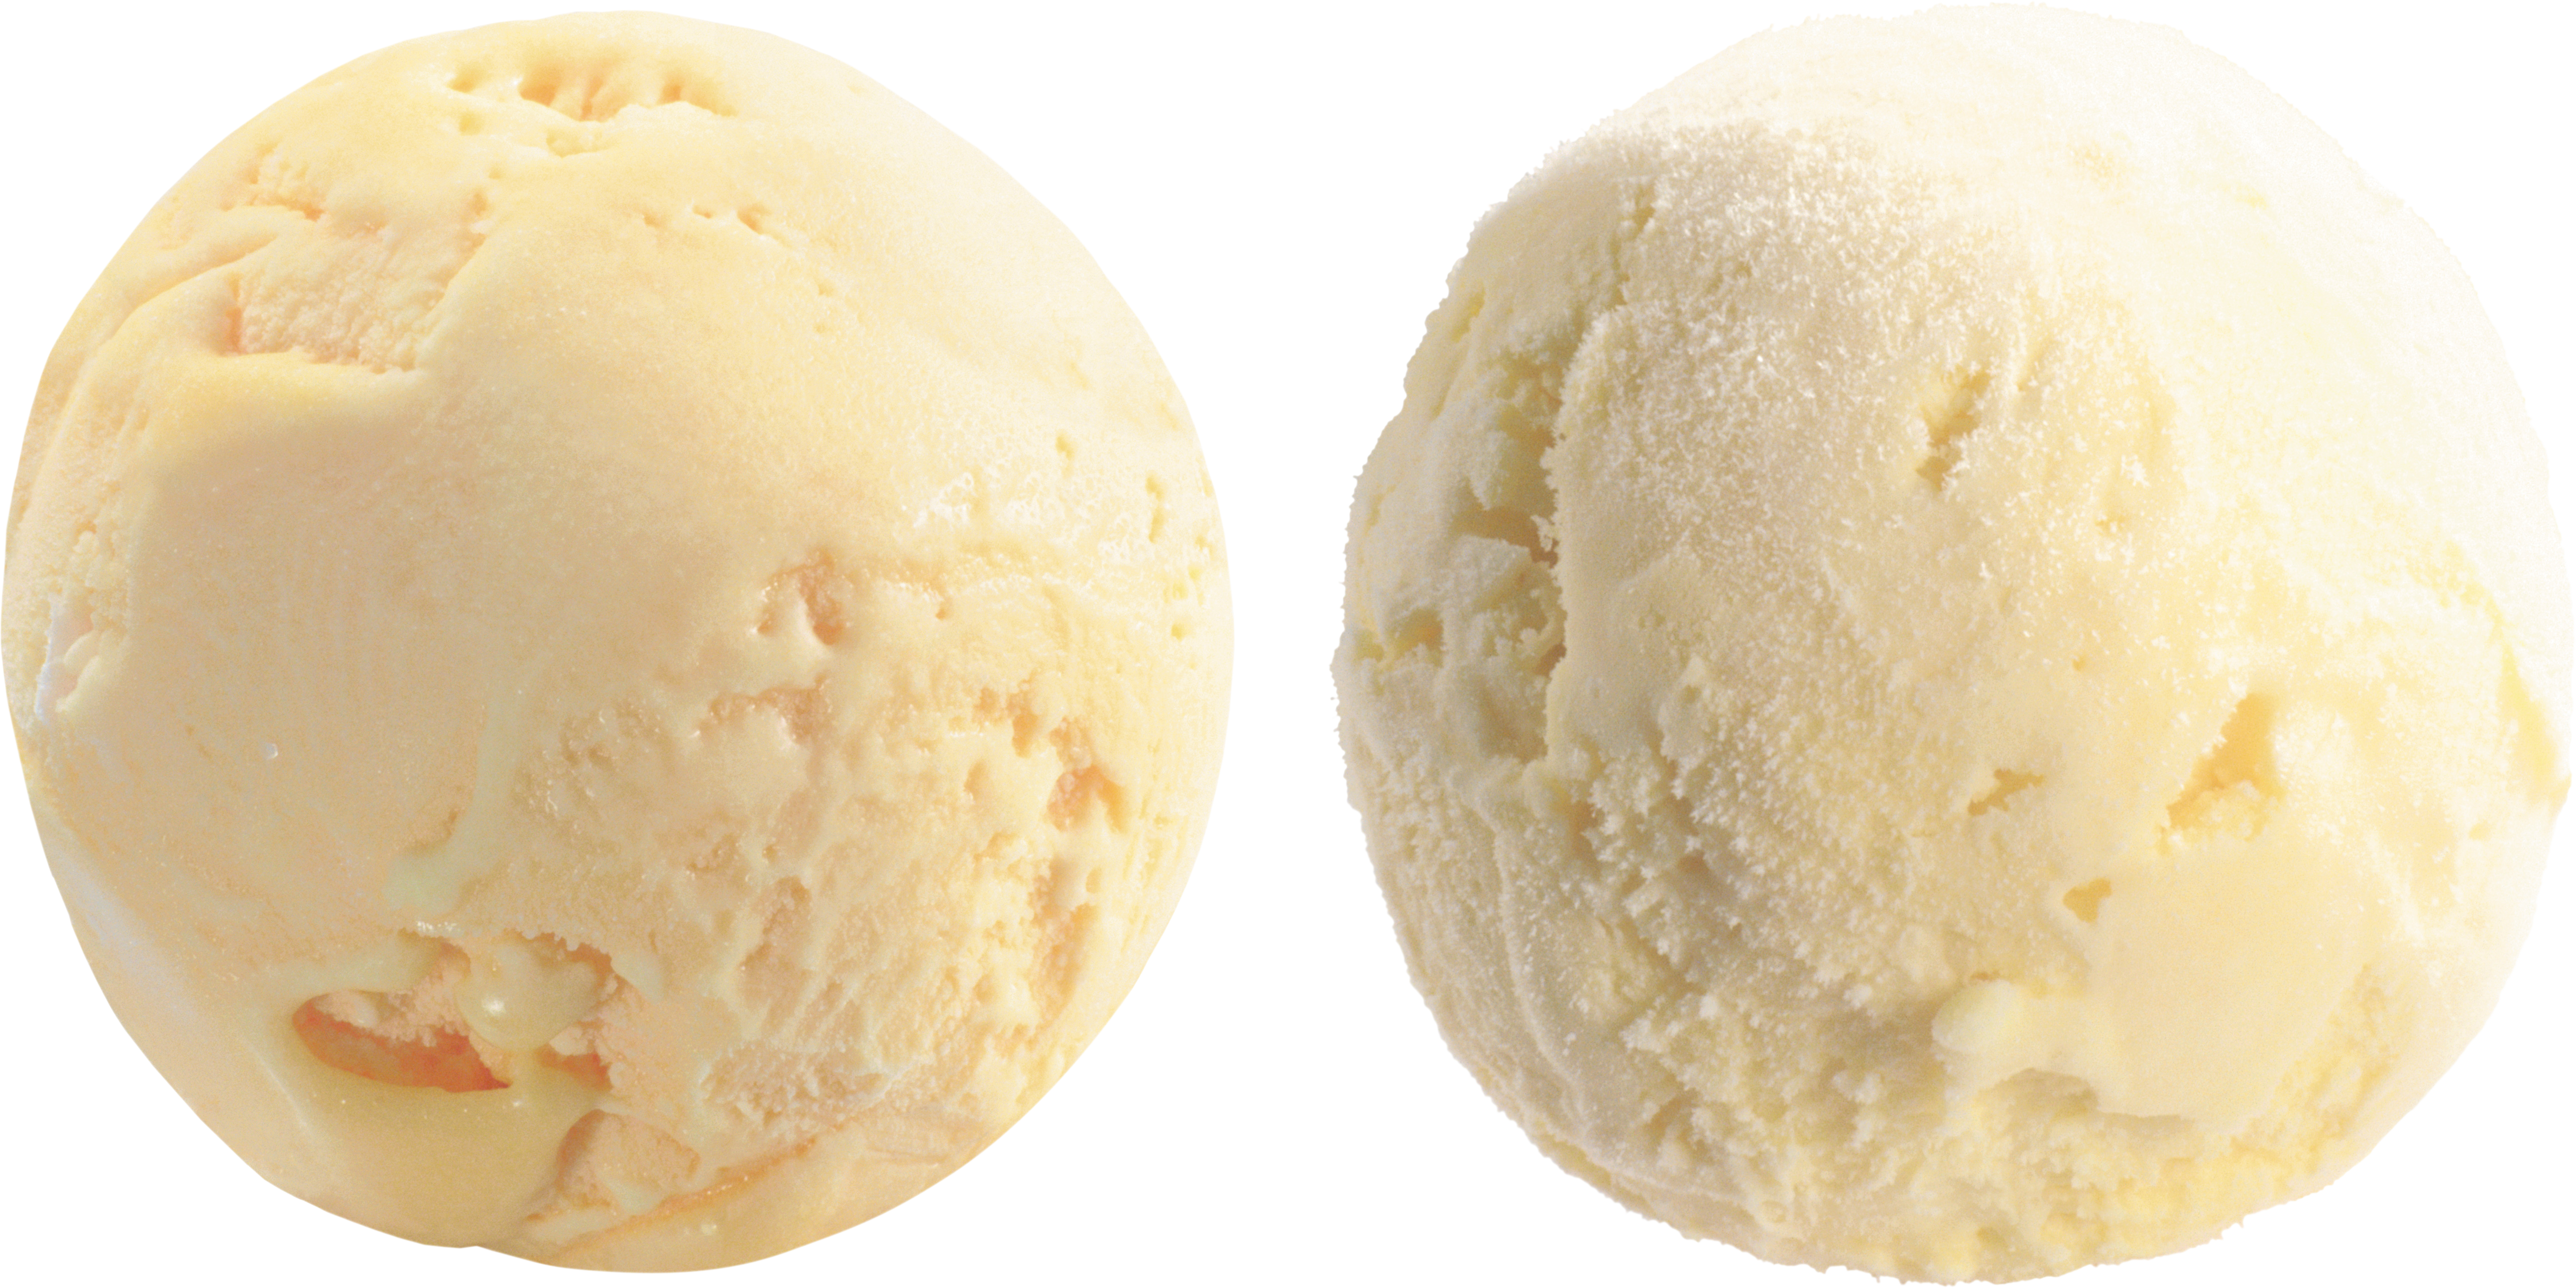 Ice Cream Ball PNG Transparent Images Free Download